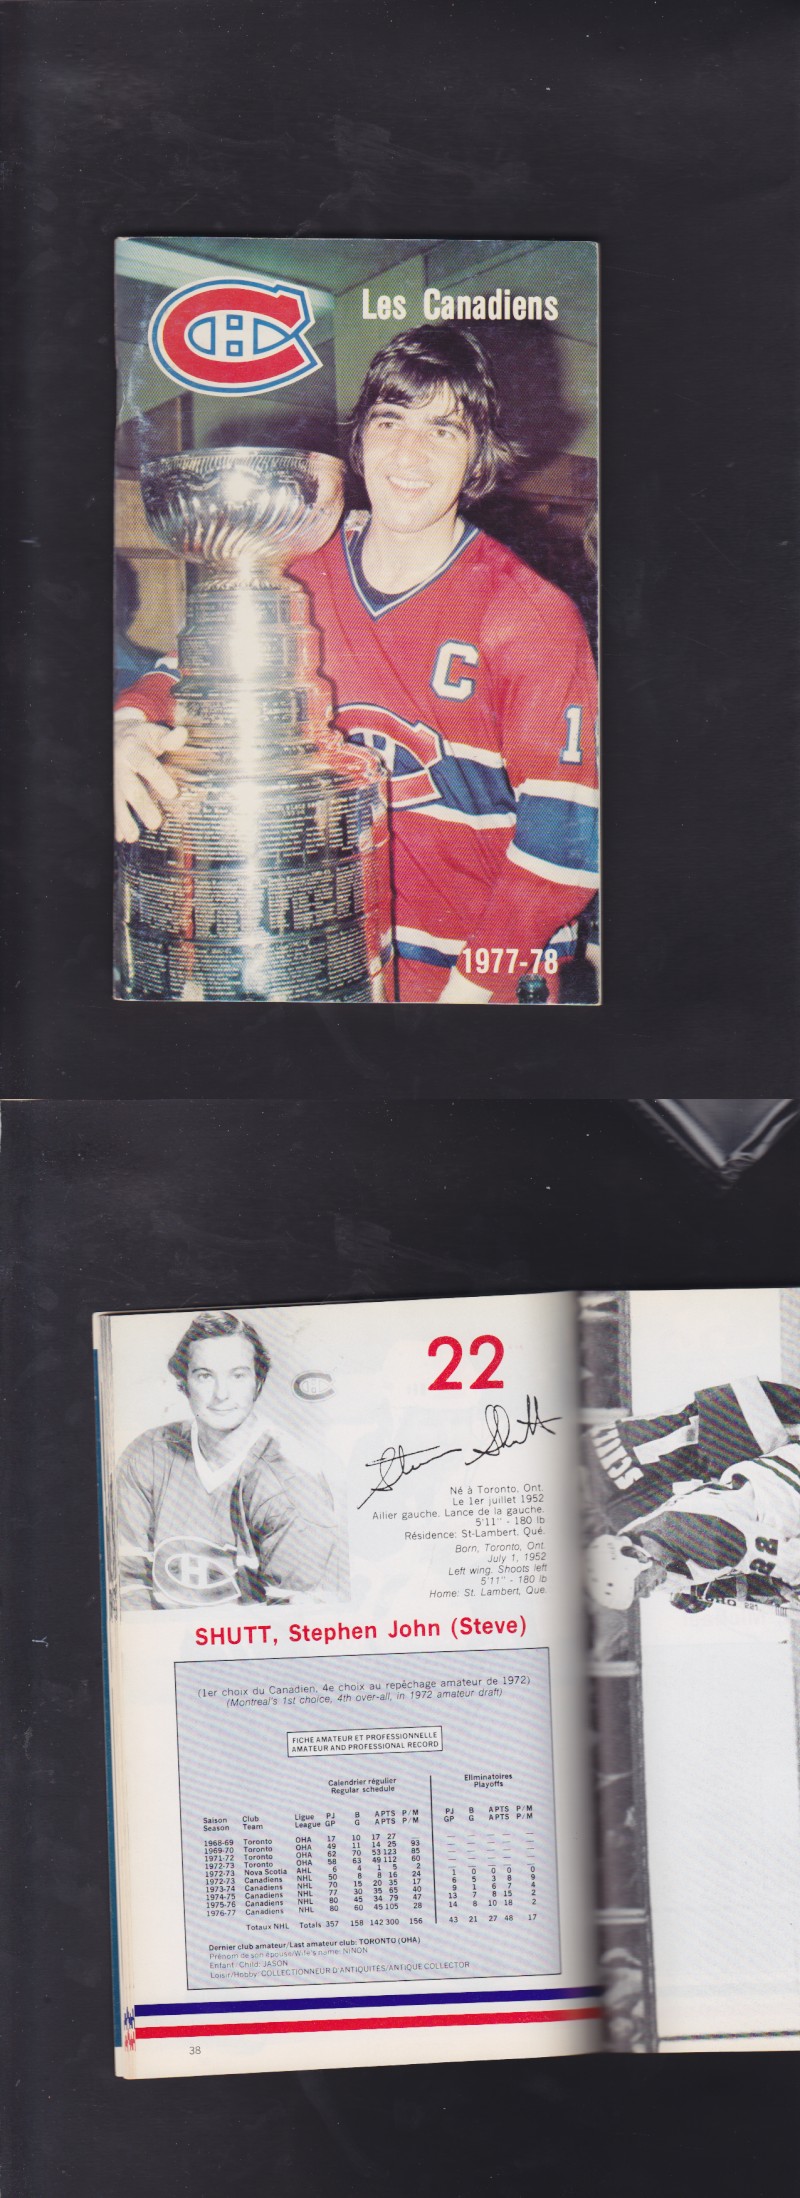 1977-78 MONTREAL CANADIENS YEARBOOK photo